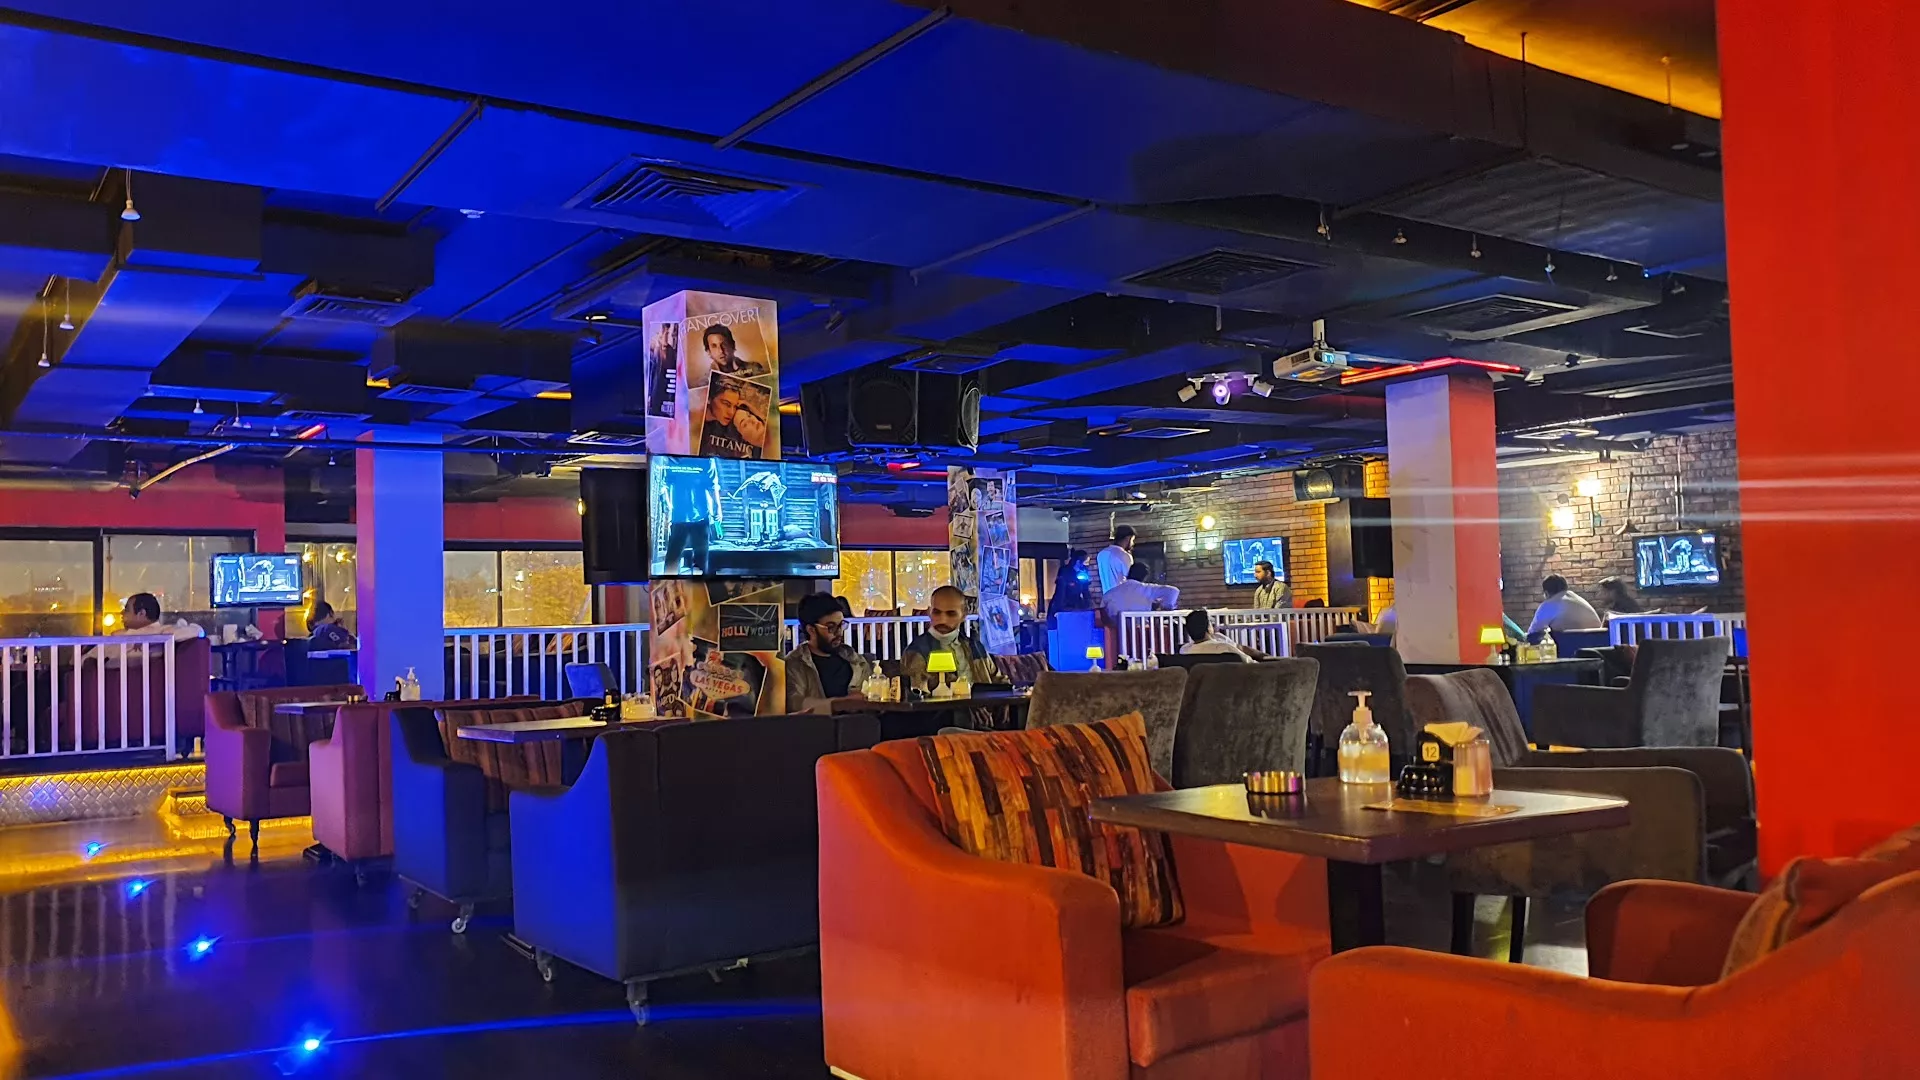 Koyla Lounge & Cafe in United Arab Emirates, Middle East | Hookah Lounges,Restaurants - Rated 4.7